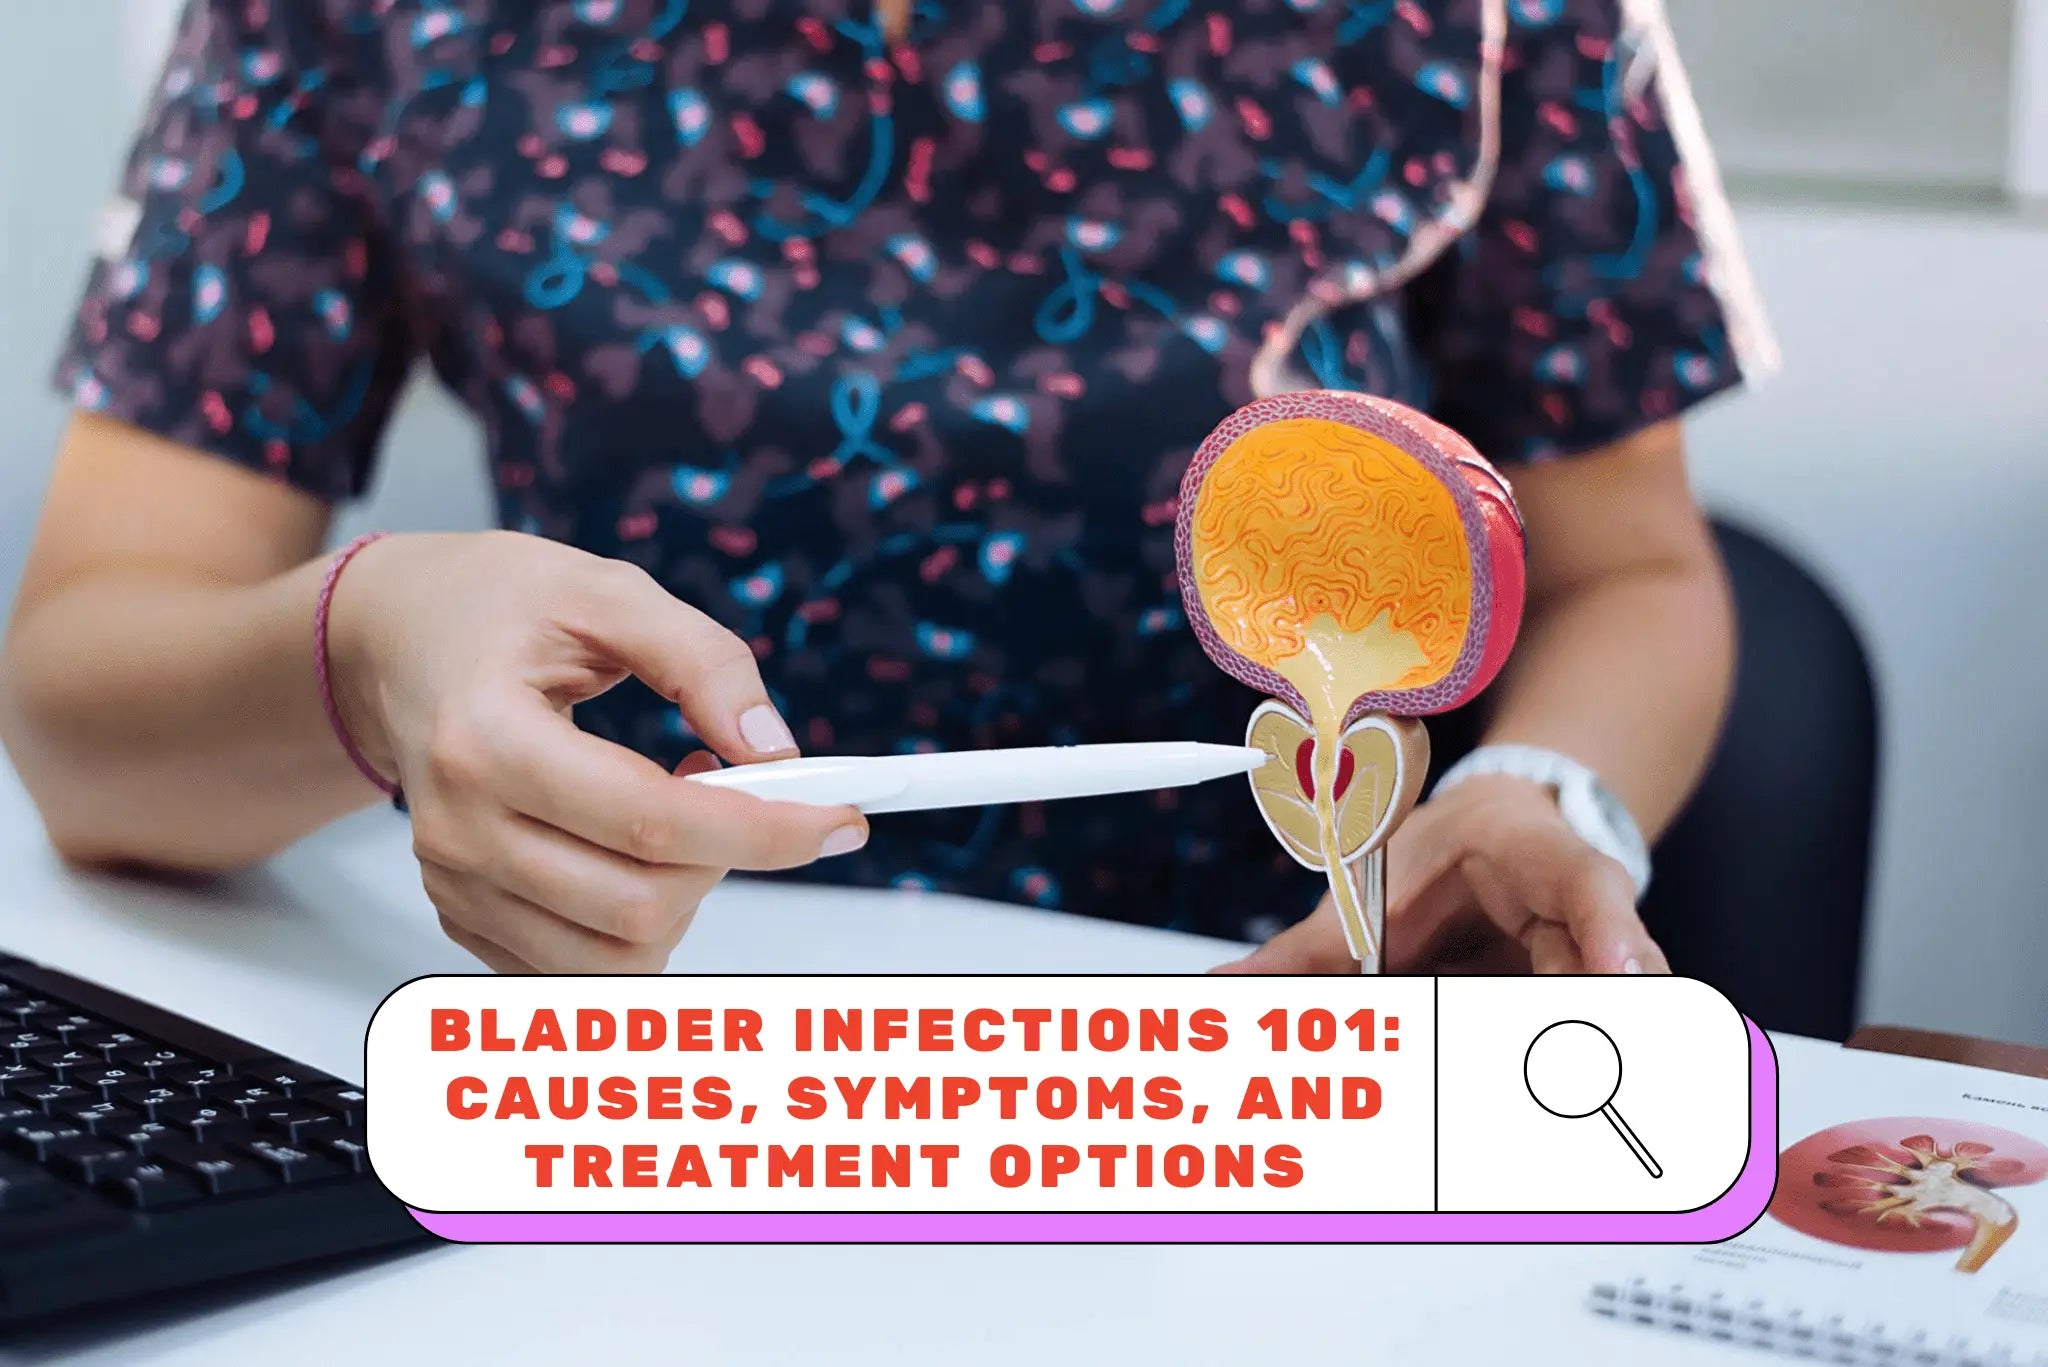 Bladder Infections 101: Causes, Symptoms, and Treatment Options - Underleak